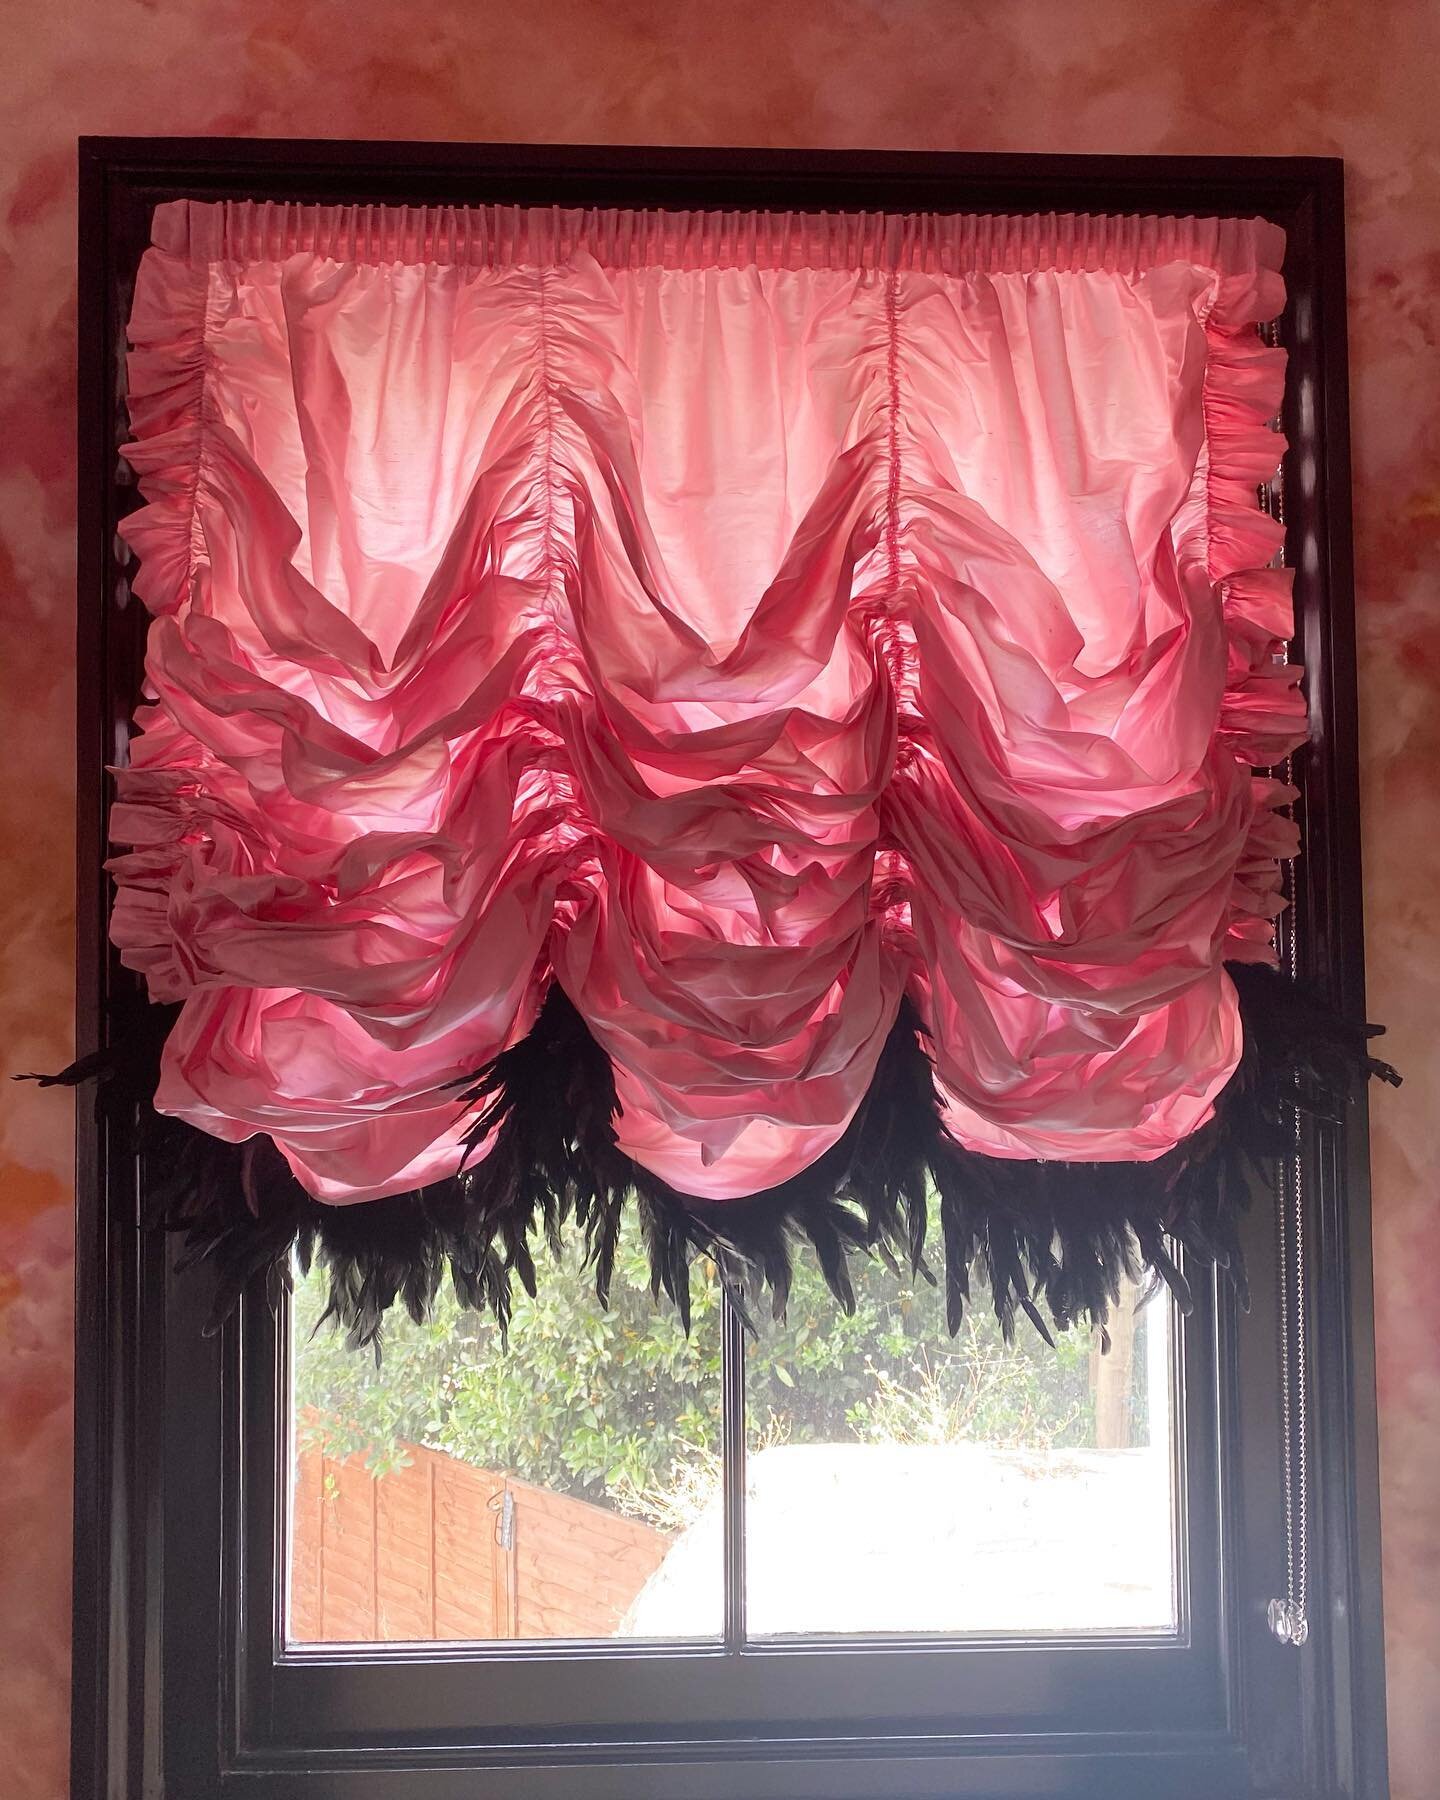 In this project, the clients had a particular vision for their Gothic inspired London Townhouse. They approached us to create remarkable draperies, which would go together with dark and romantic theme of their home. These pink silk inverted balloon b